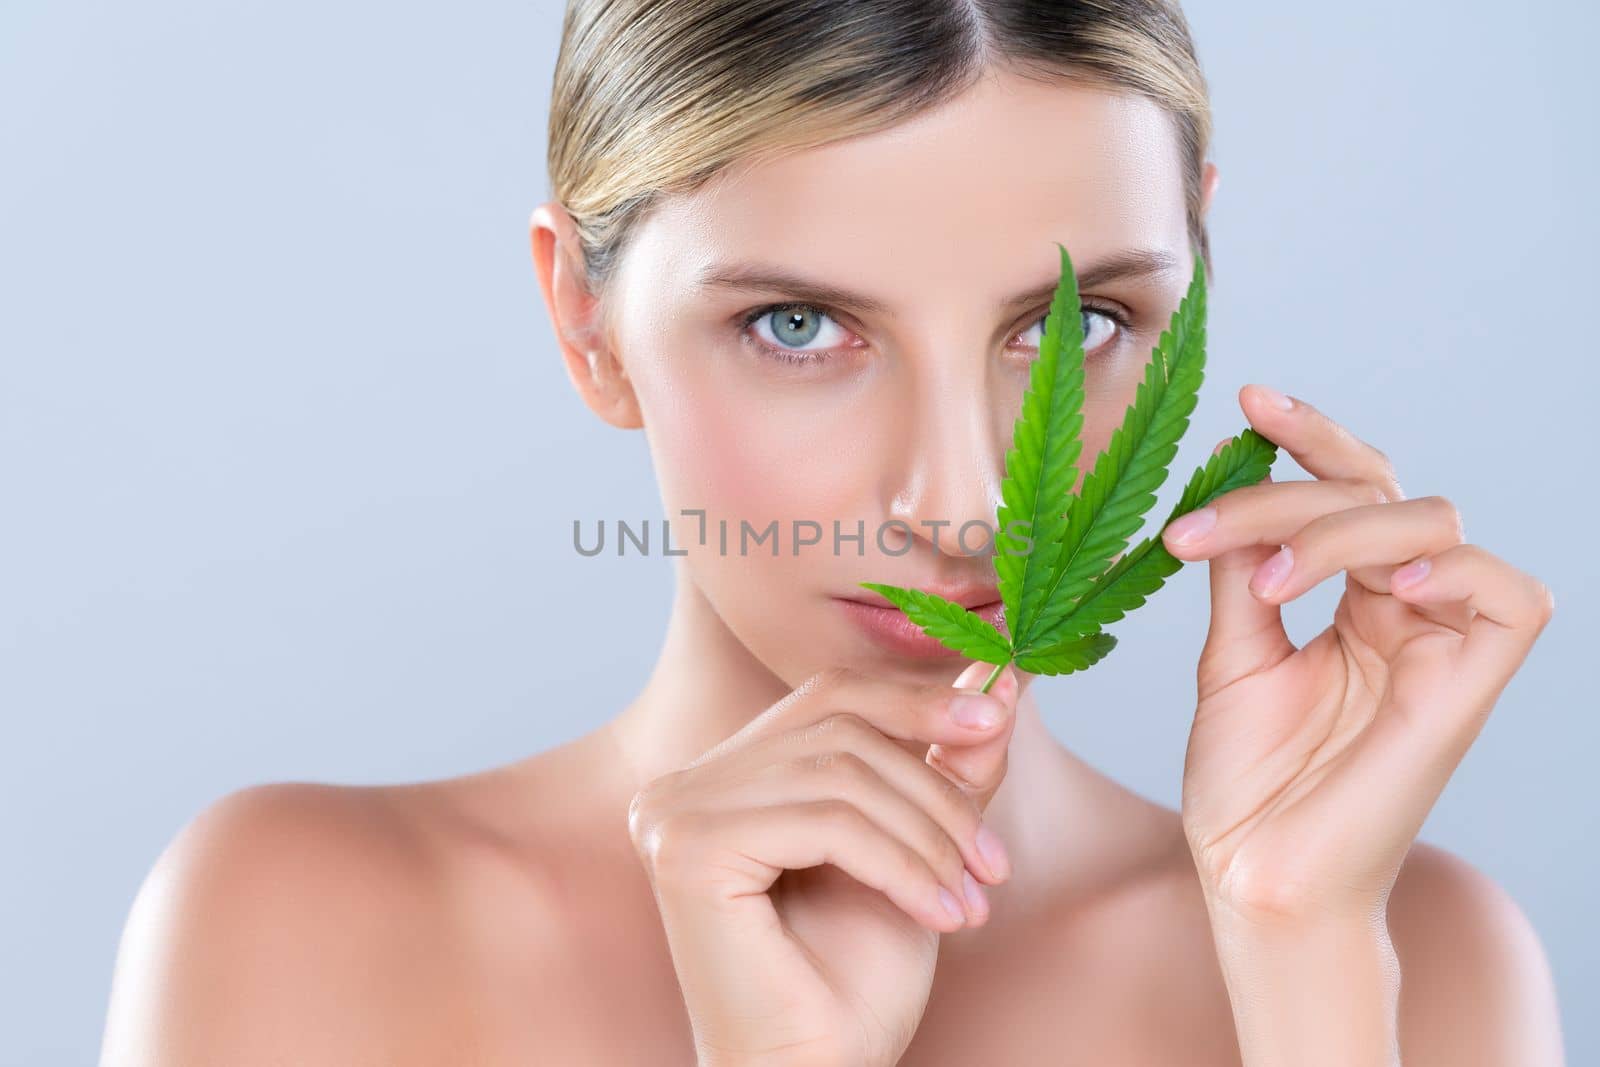 Closeup alluring beautiful woman model portrait holding green leaf as concept for cannabis skincare cosmetic product for skin freshness treatment in isolated background.